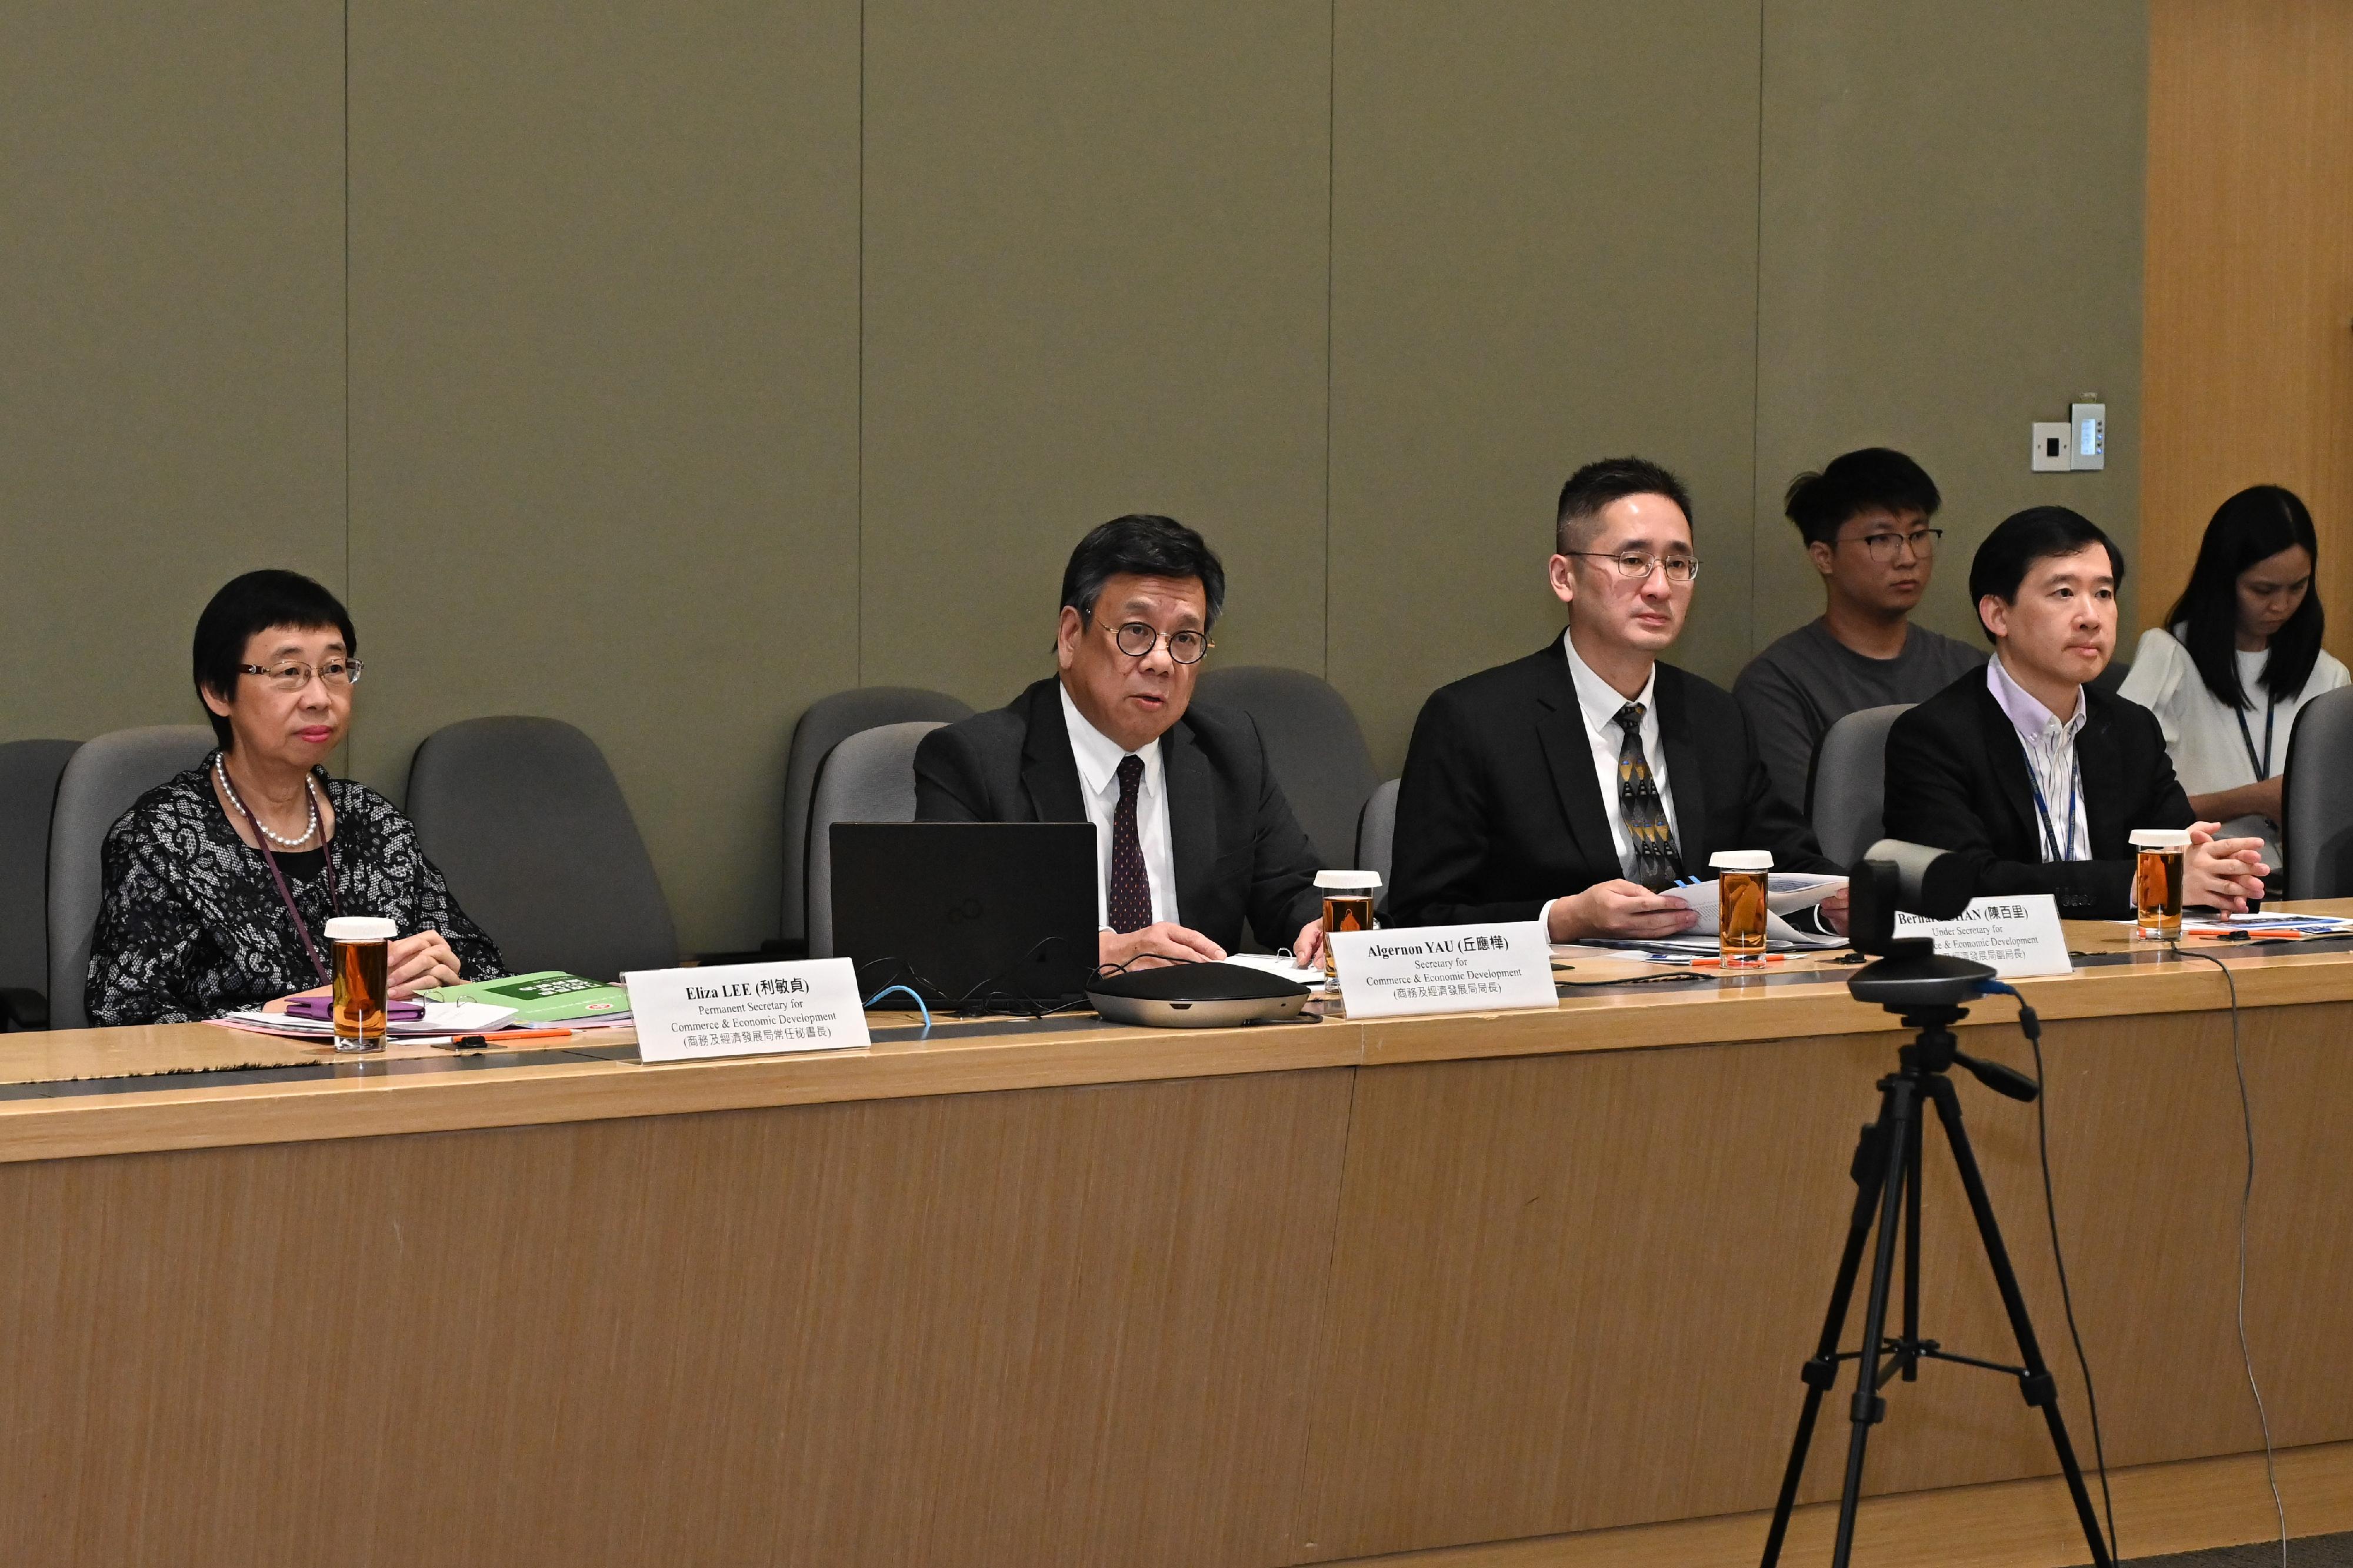 The Secretary for Commerce and Economic Development, Mr Algernon Yau (second left), briefed members of the Trade and Industry Advisory Board on initiatives related to commerce and trade in "The Chief Executive's 2023 Policy Address" at a meeting today (October 30).